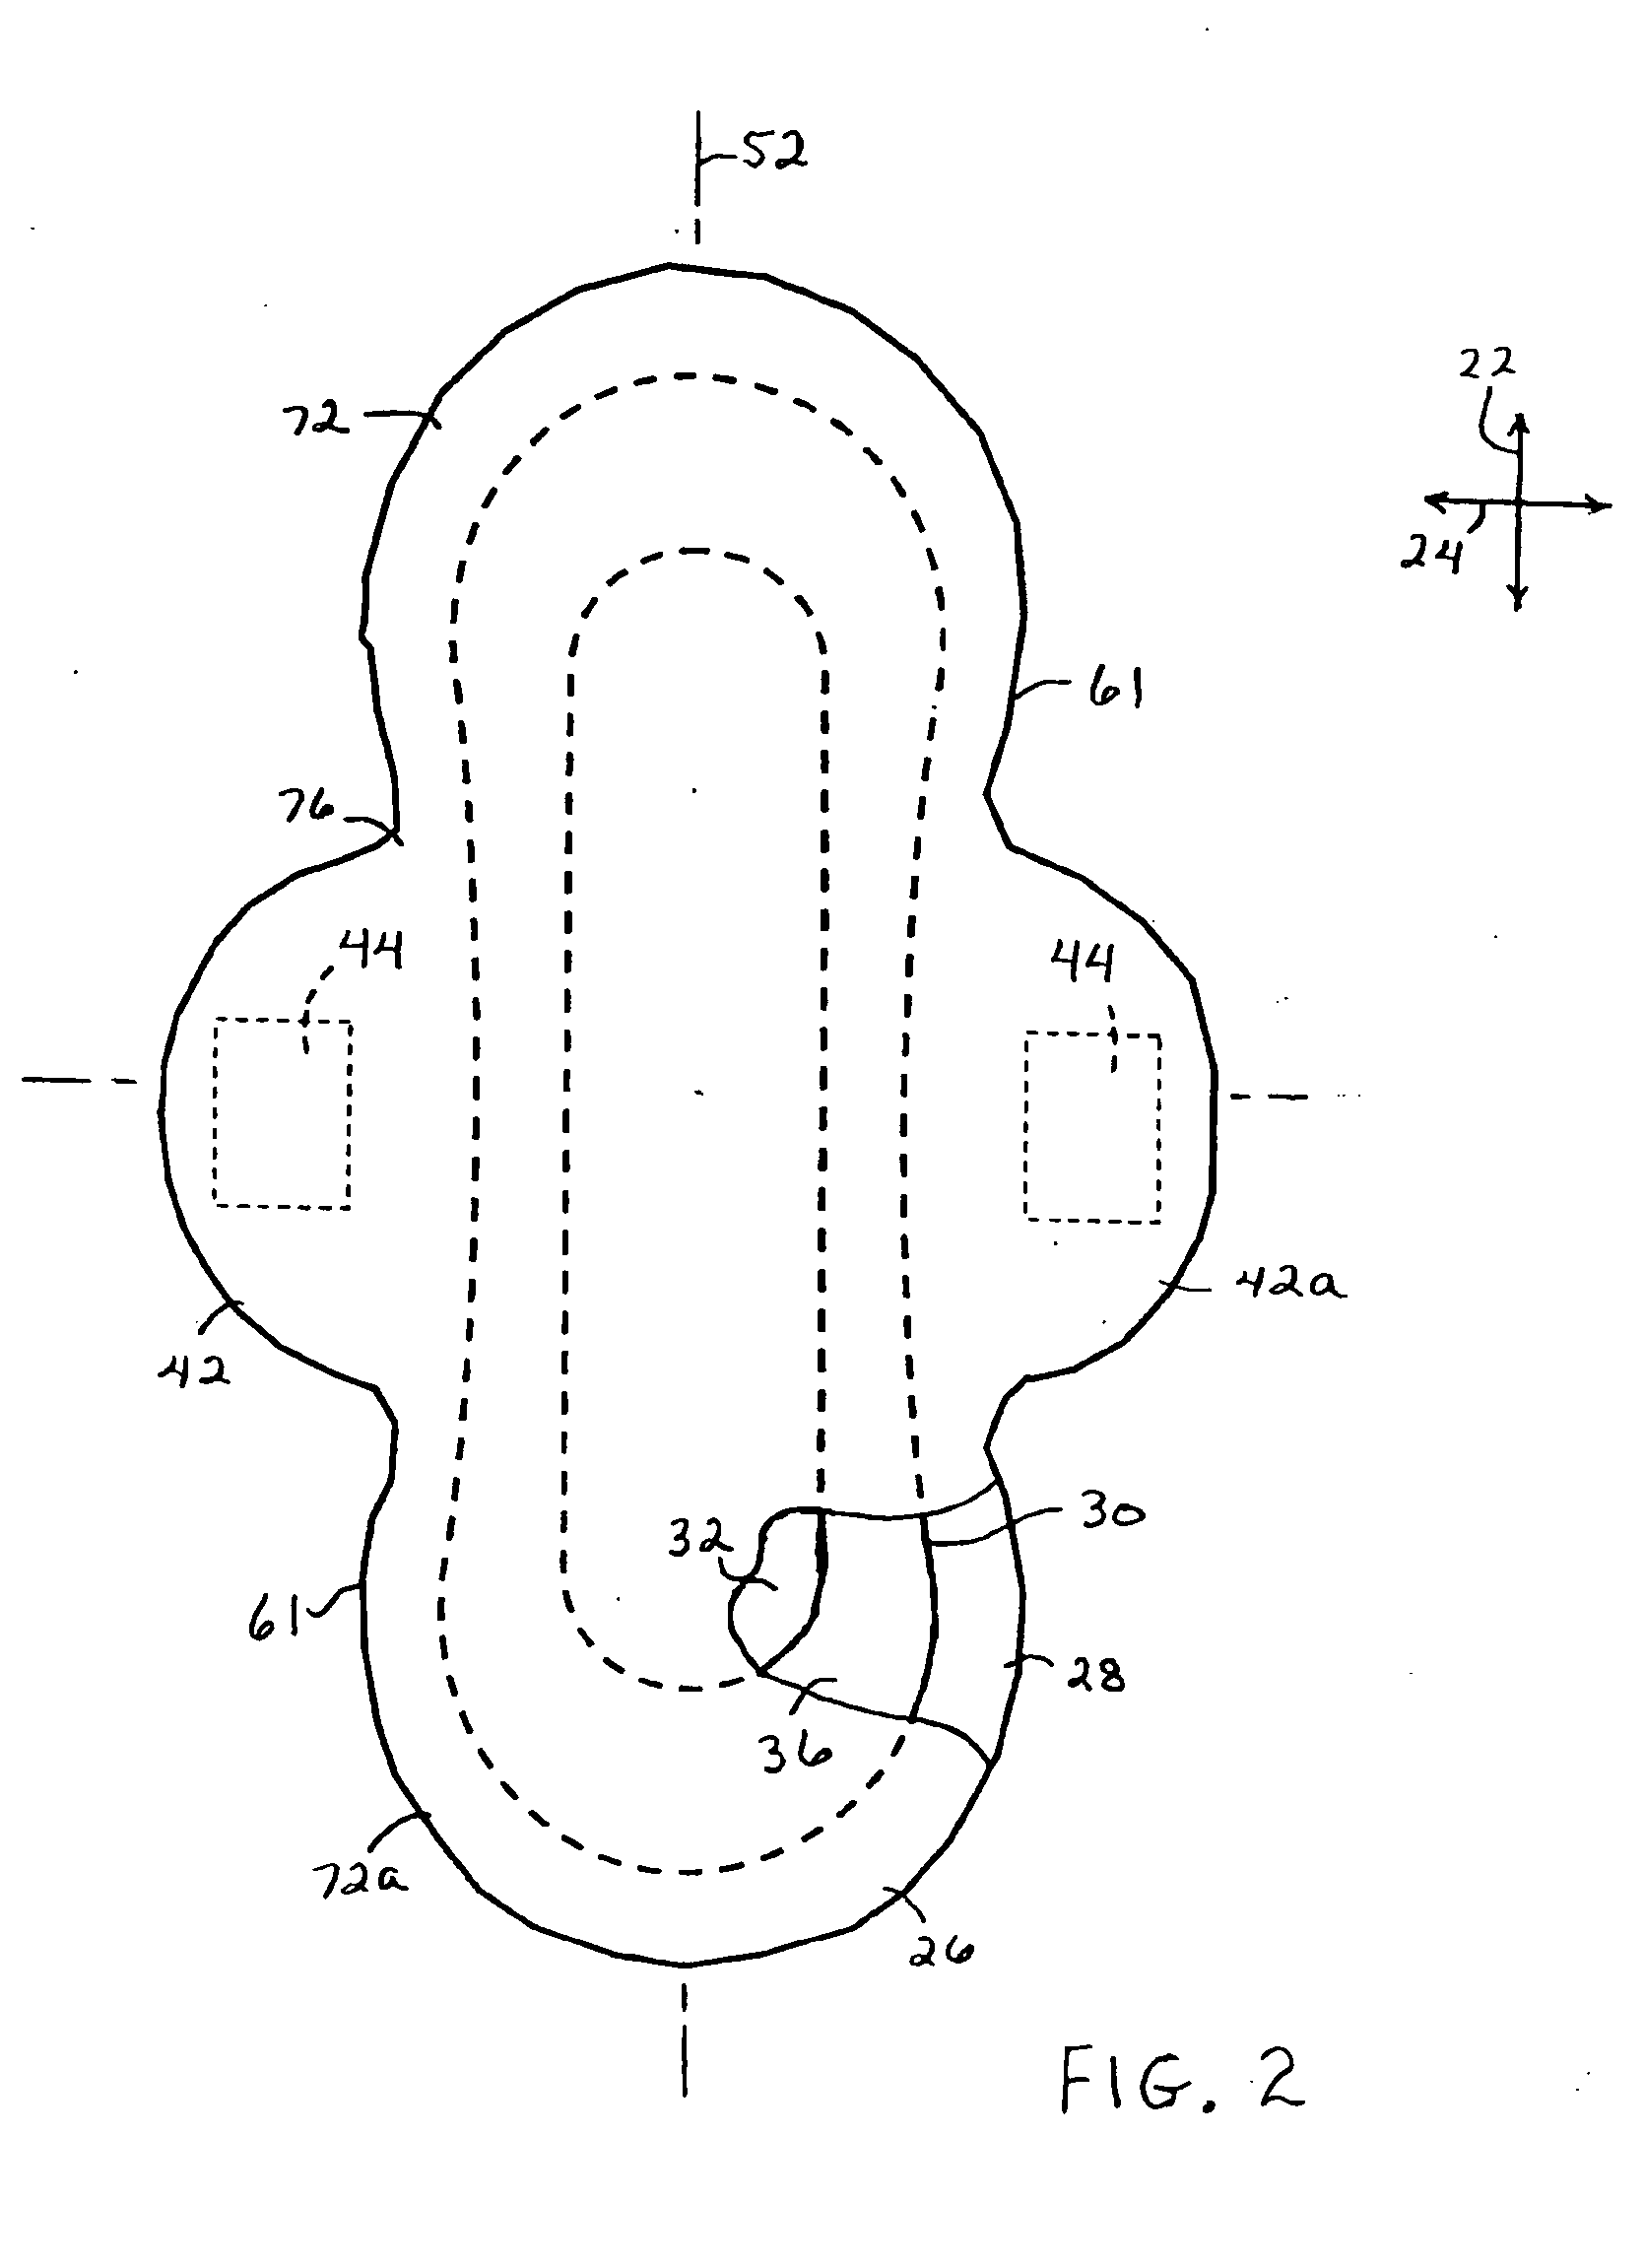 Absorbent article with lengthwise, compact-fold